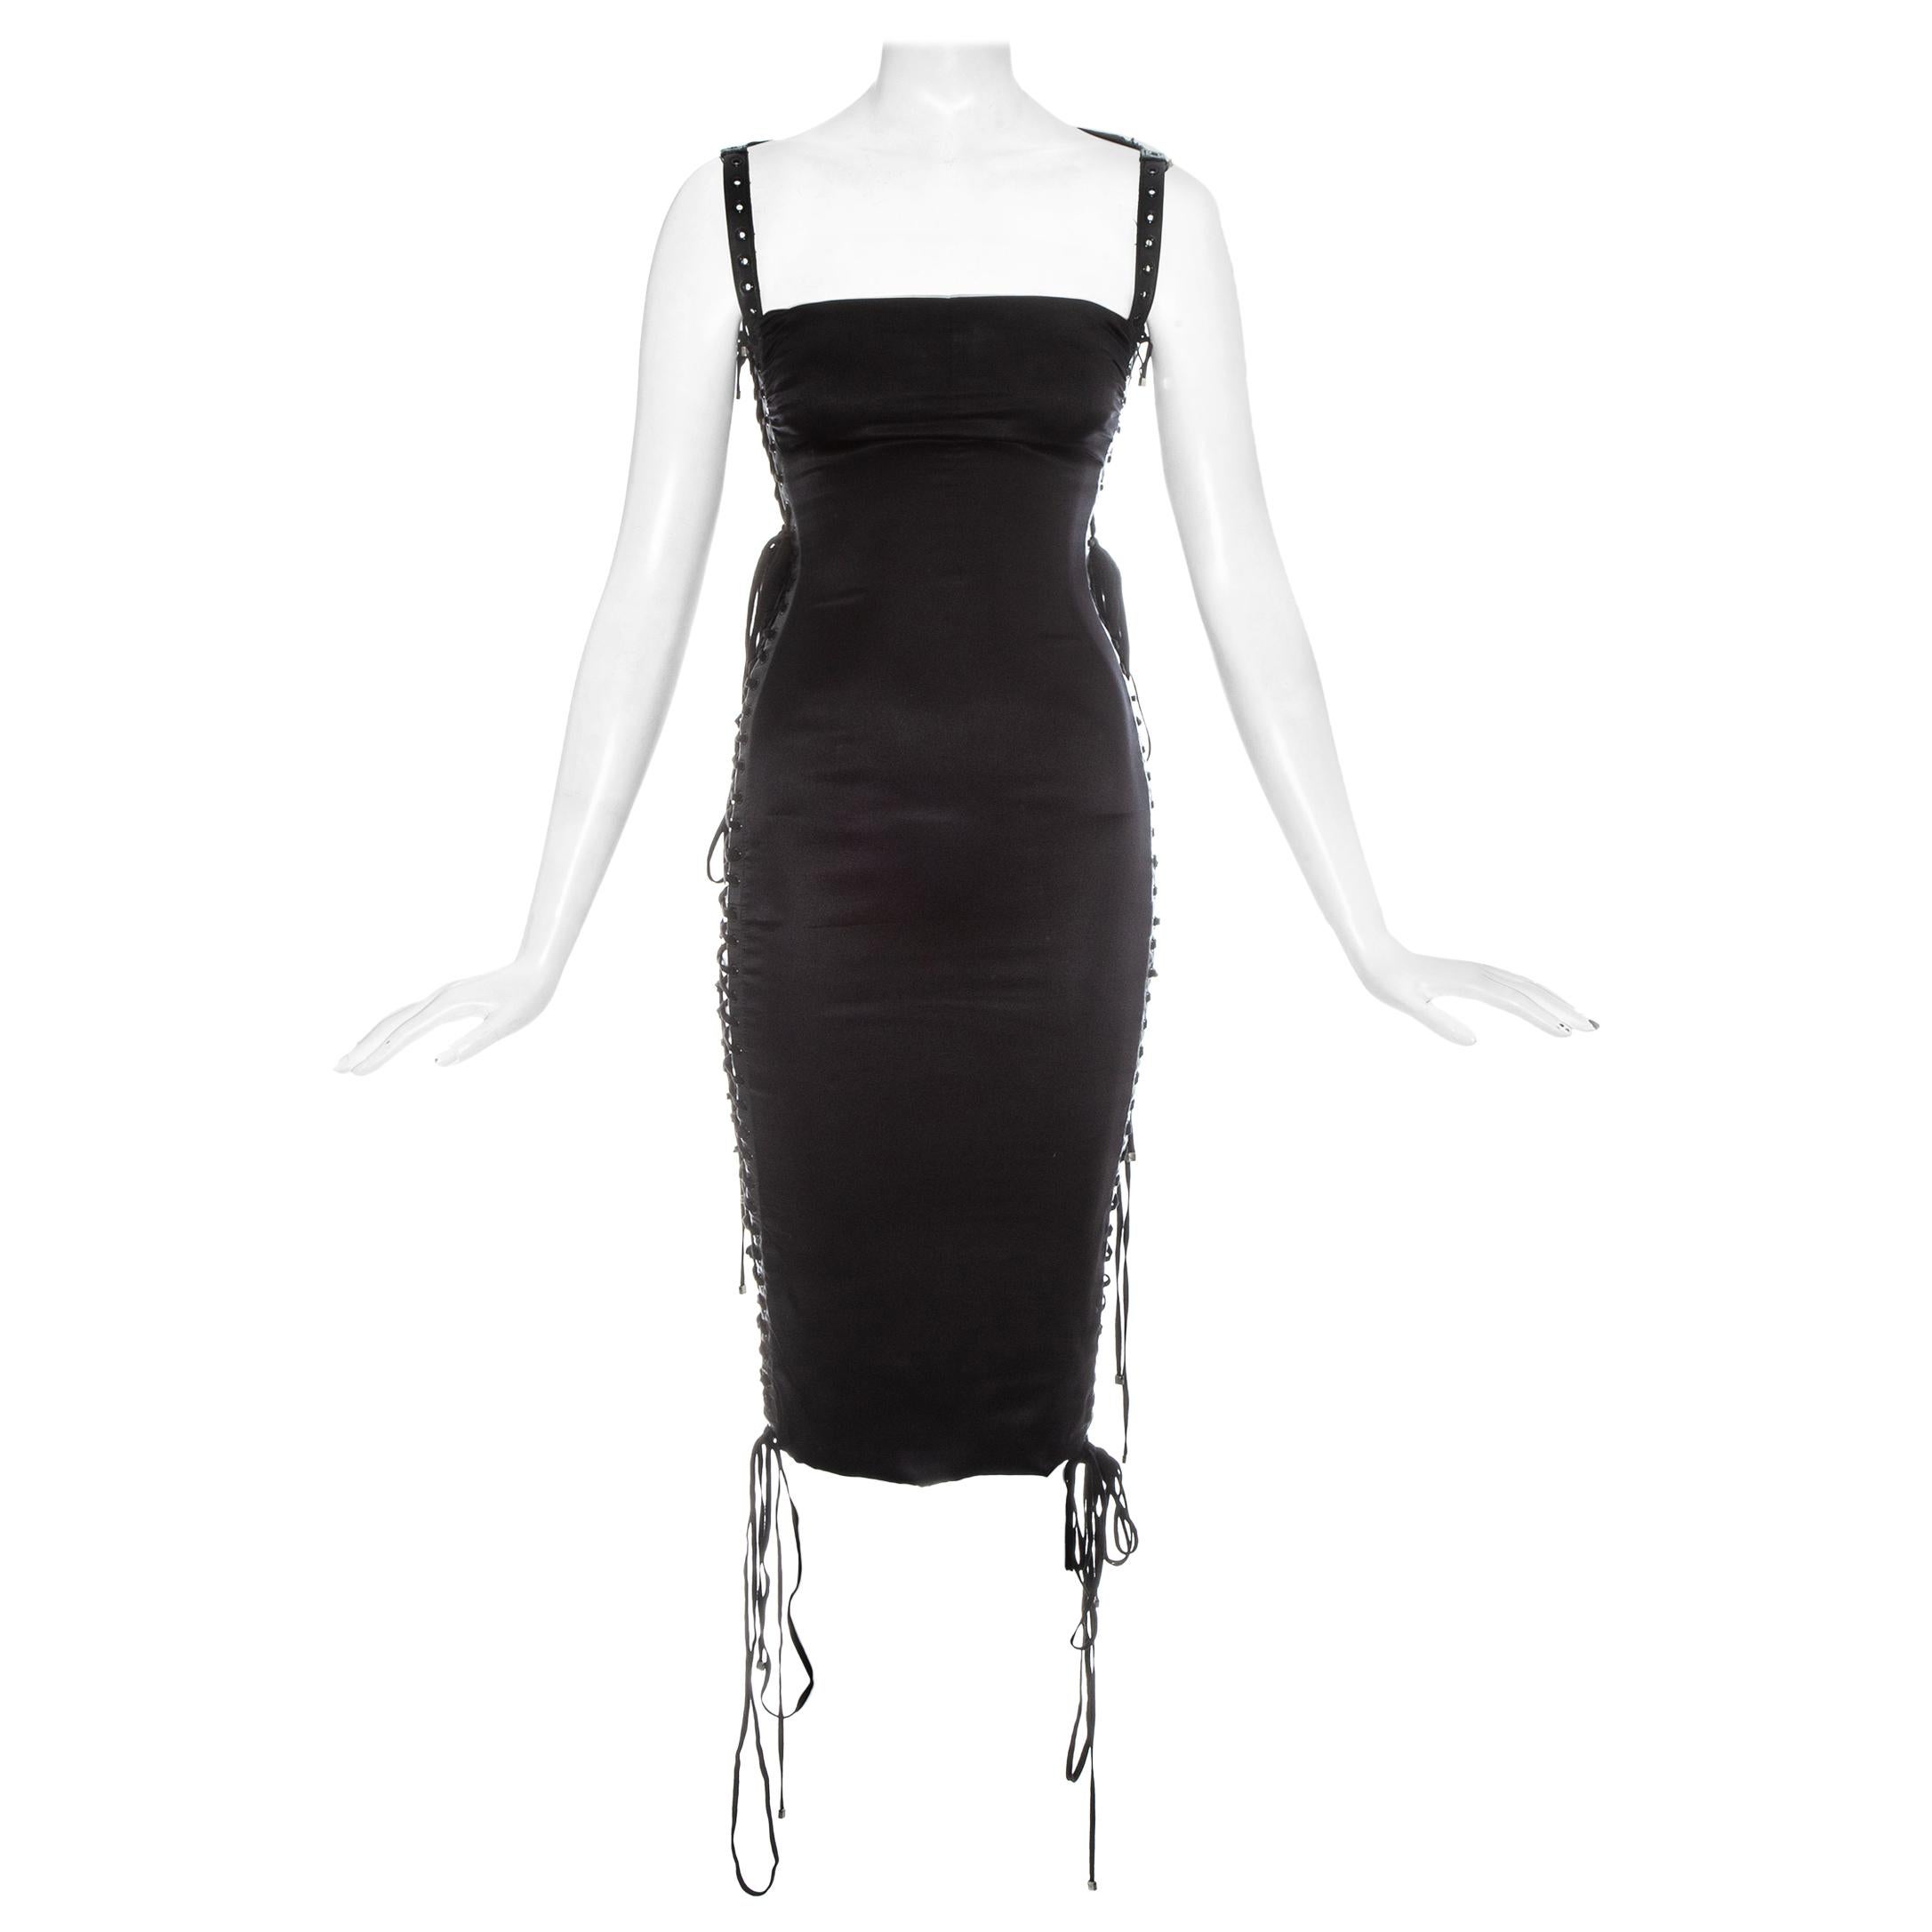 Dolce & Gabbana; black silk spandex figure hugging evening dress. 

- Lambskin leather grommet trim 
- Open on both sides with lace up fastenings
- Invisible side zip closure 

Spring-Summer 2003

*due to the lace up fastenings the dress can be worn